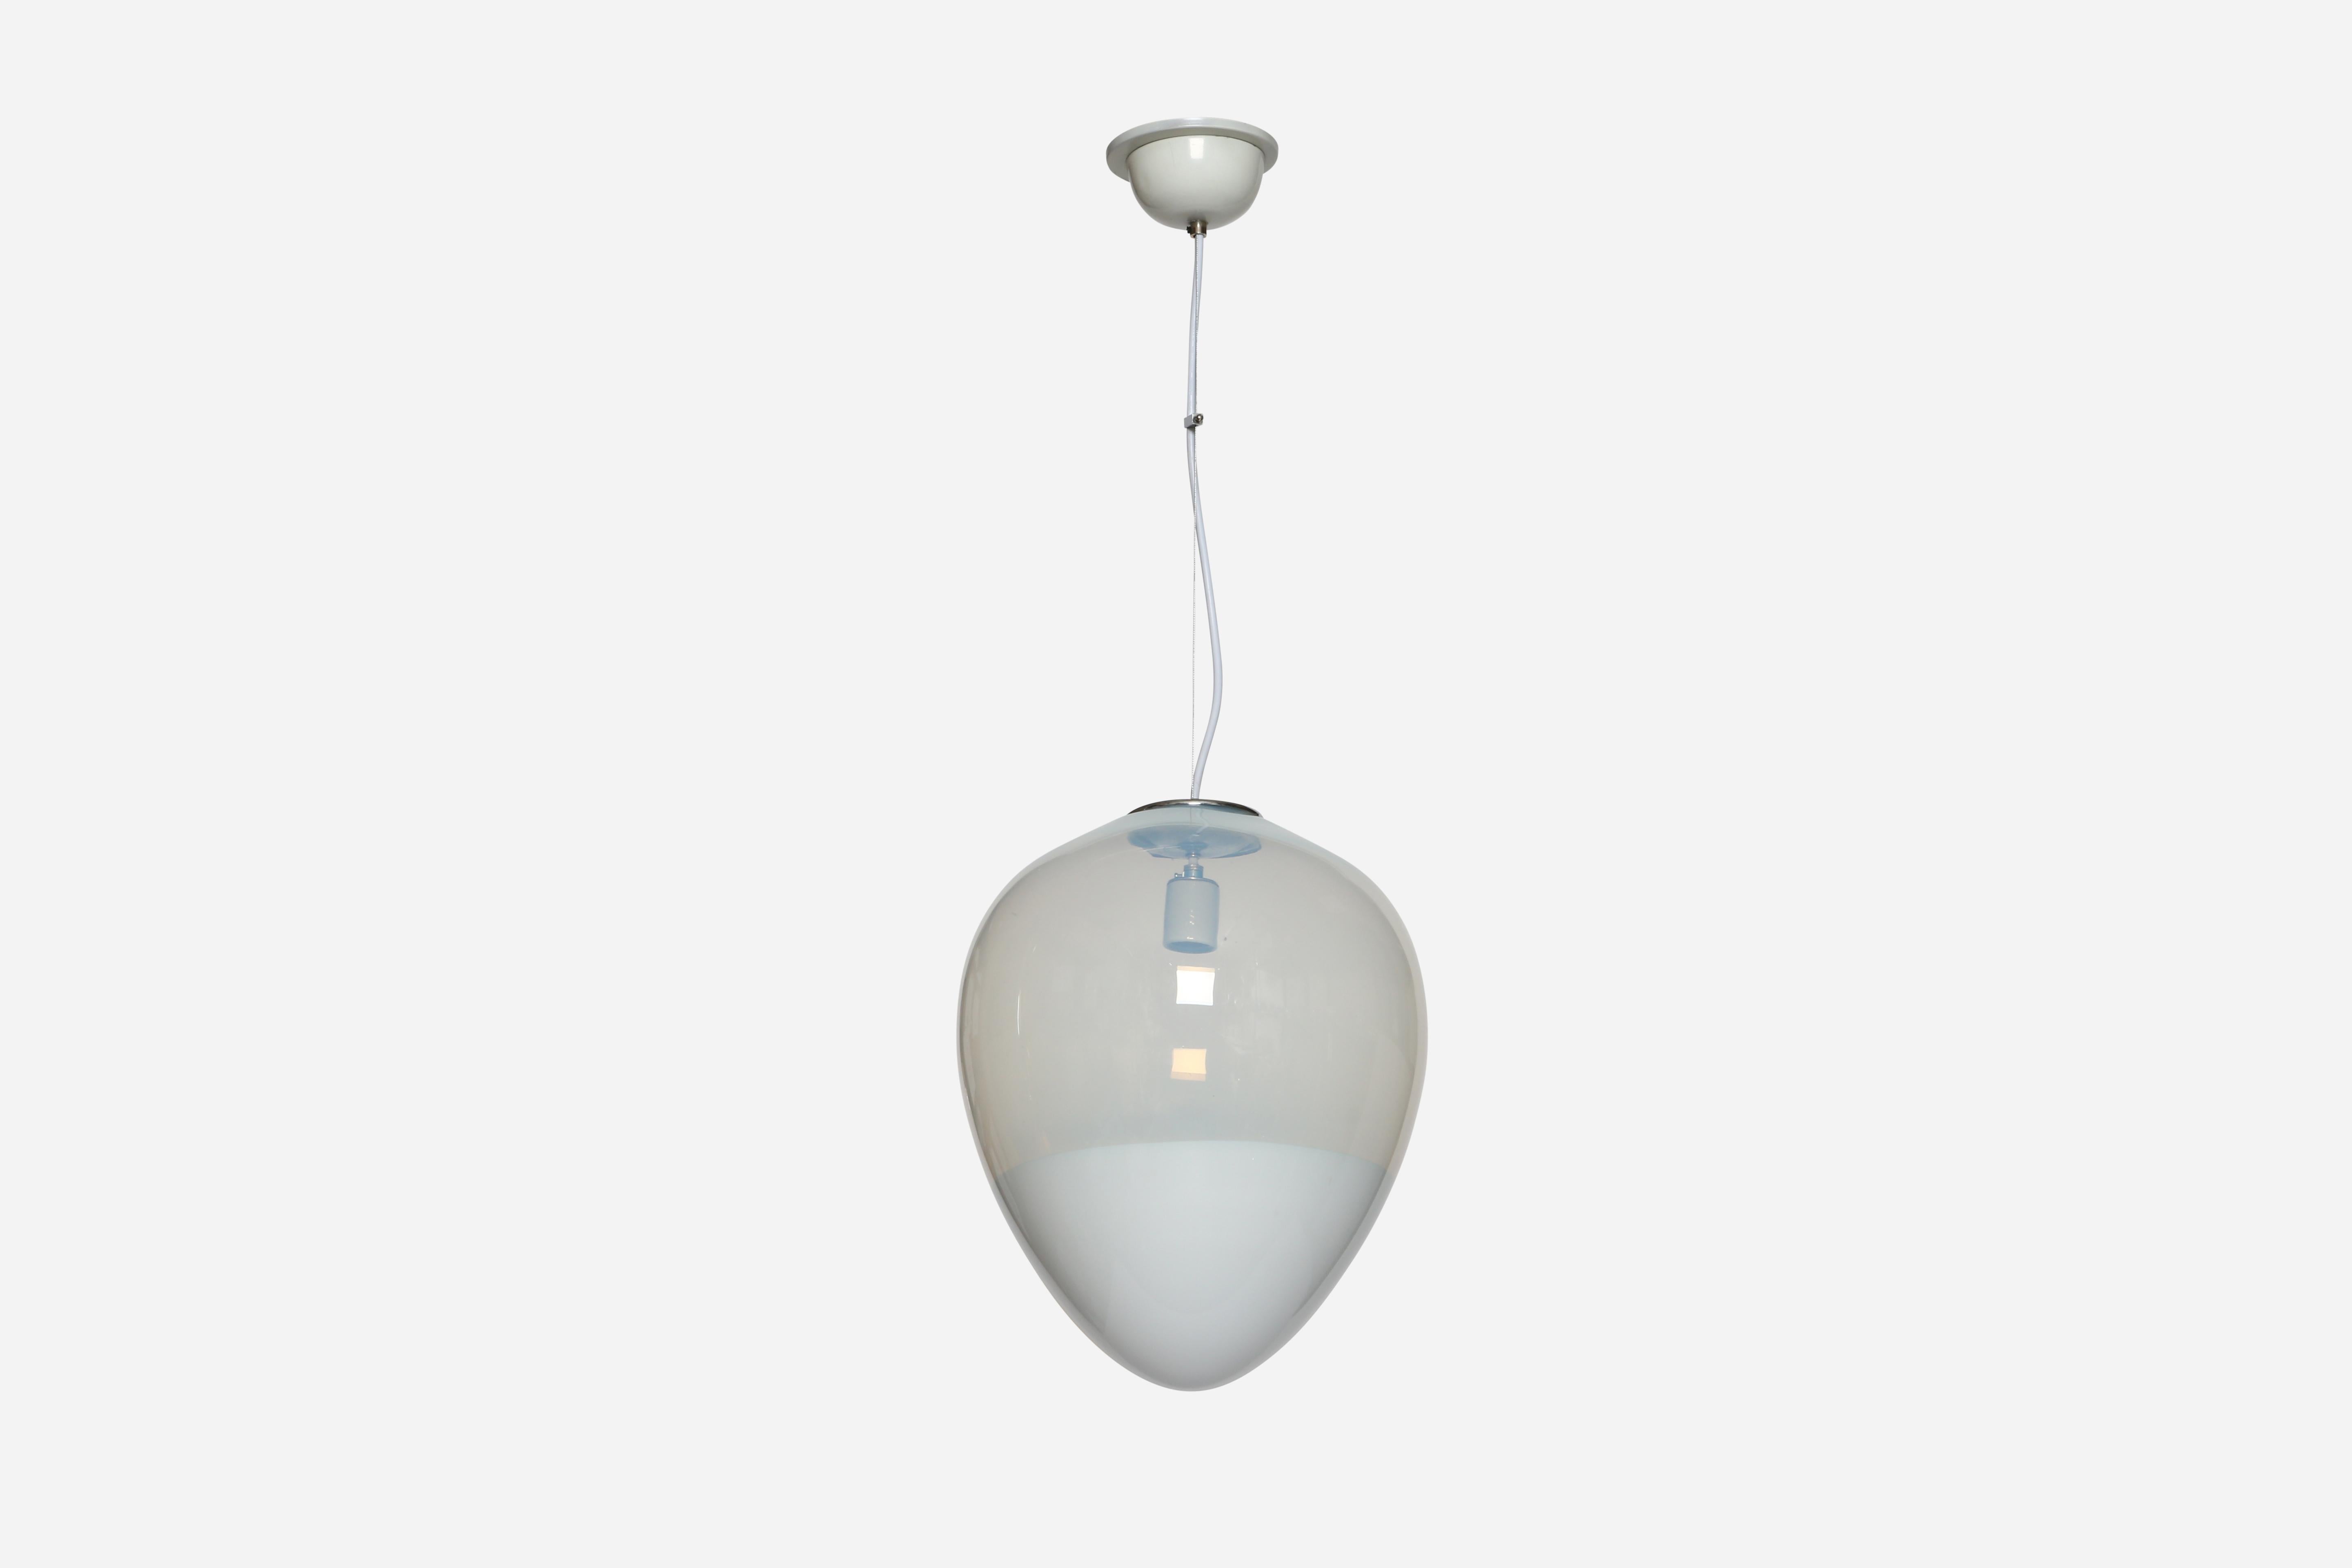 Murano glass ceiling pendant by Leucos.
Made in Italy in 1970s.
Handblown glass.
Rewired for US.
Takes one medium base bulb.
Overall drop is adjustable, can be shorter.
1 ceiling pendant is available.
Price is for 1 pendant.

We take pride in